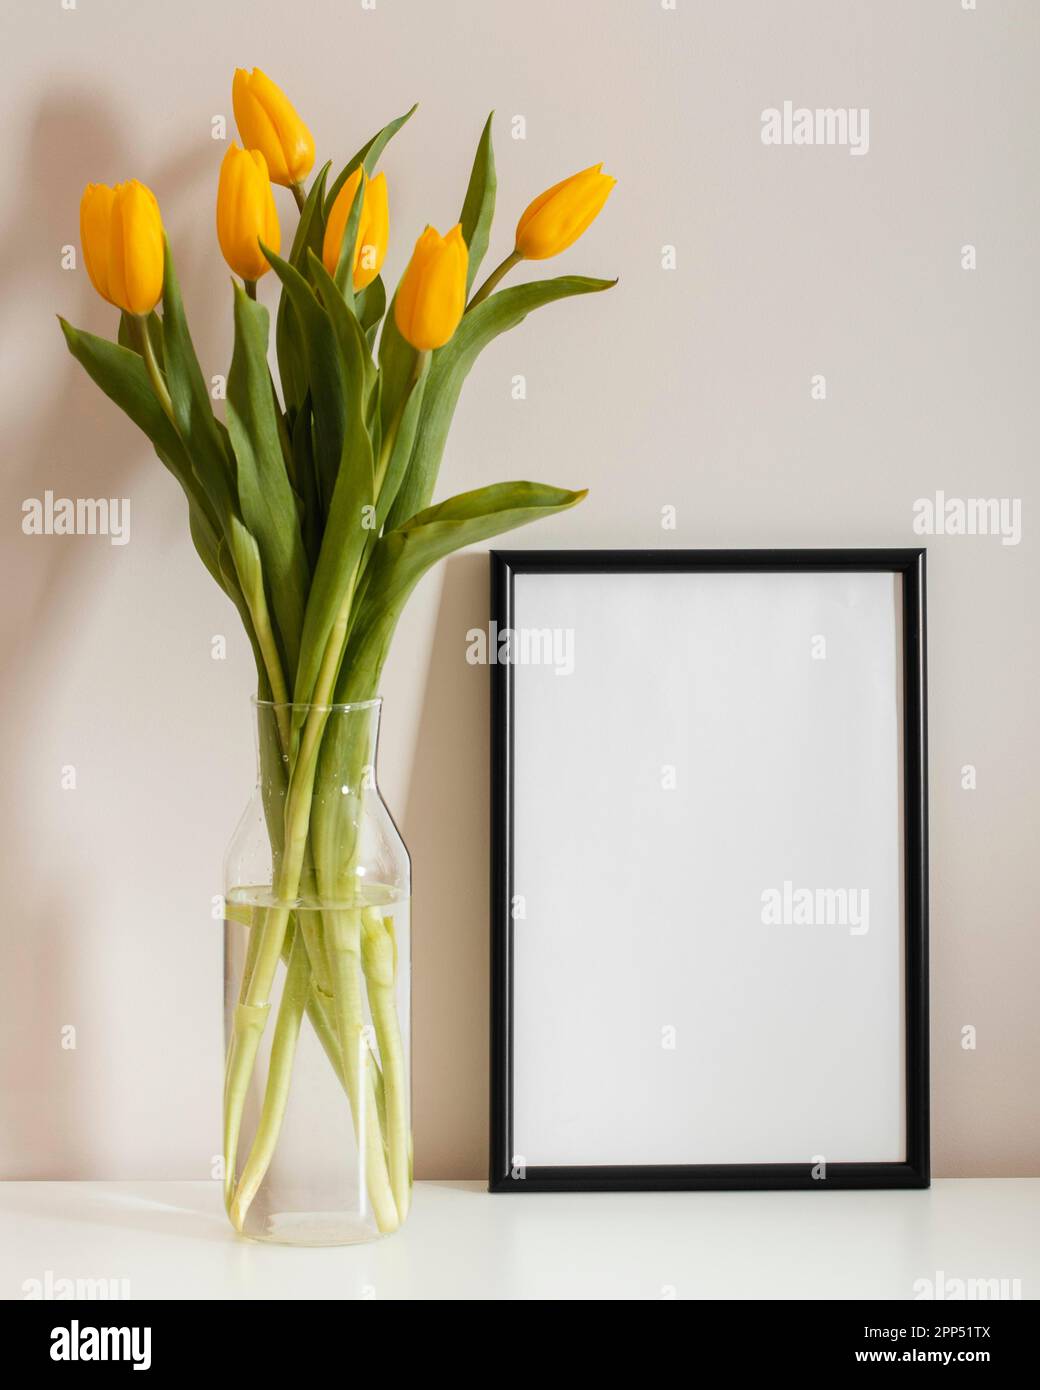 Front view bouquet tulips vase with empty frame Stock Photo